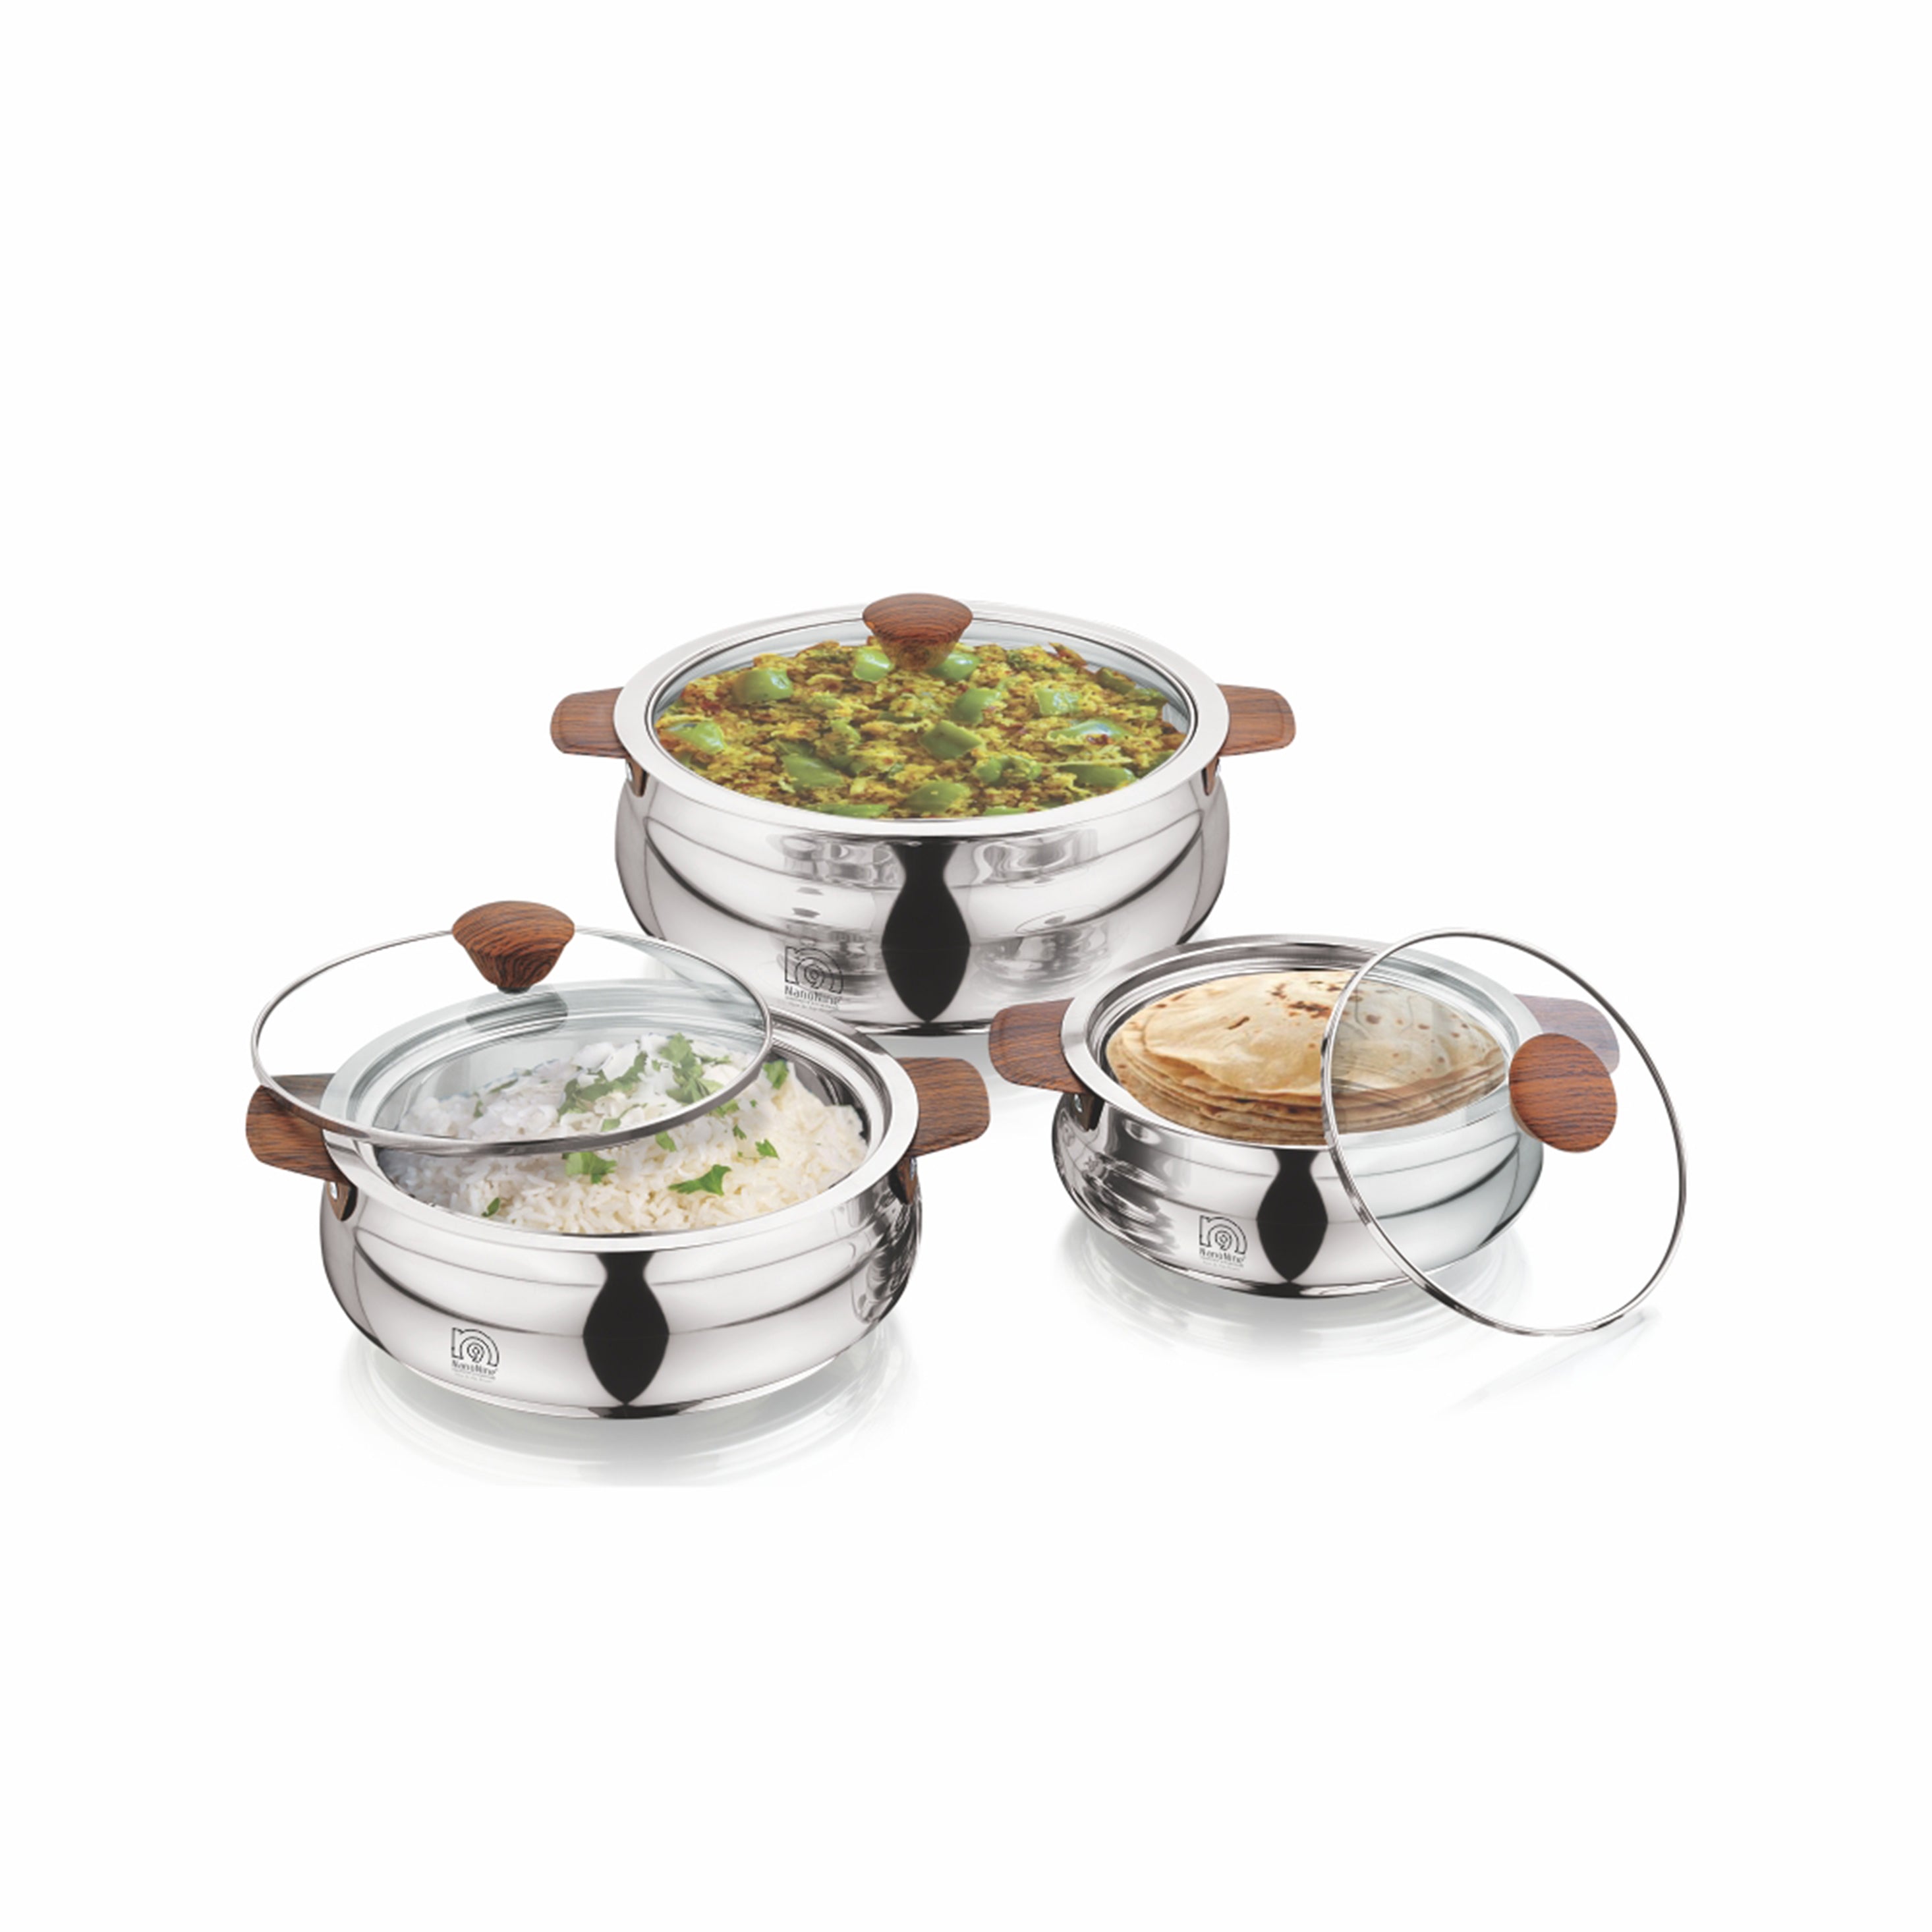 NanoNine Royale Steel Wood 750 ml + 1.24 L + 2.65 L Double Wall Insulated Stainless Steel Casserole with Glass Lid.